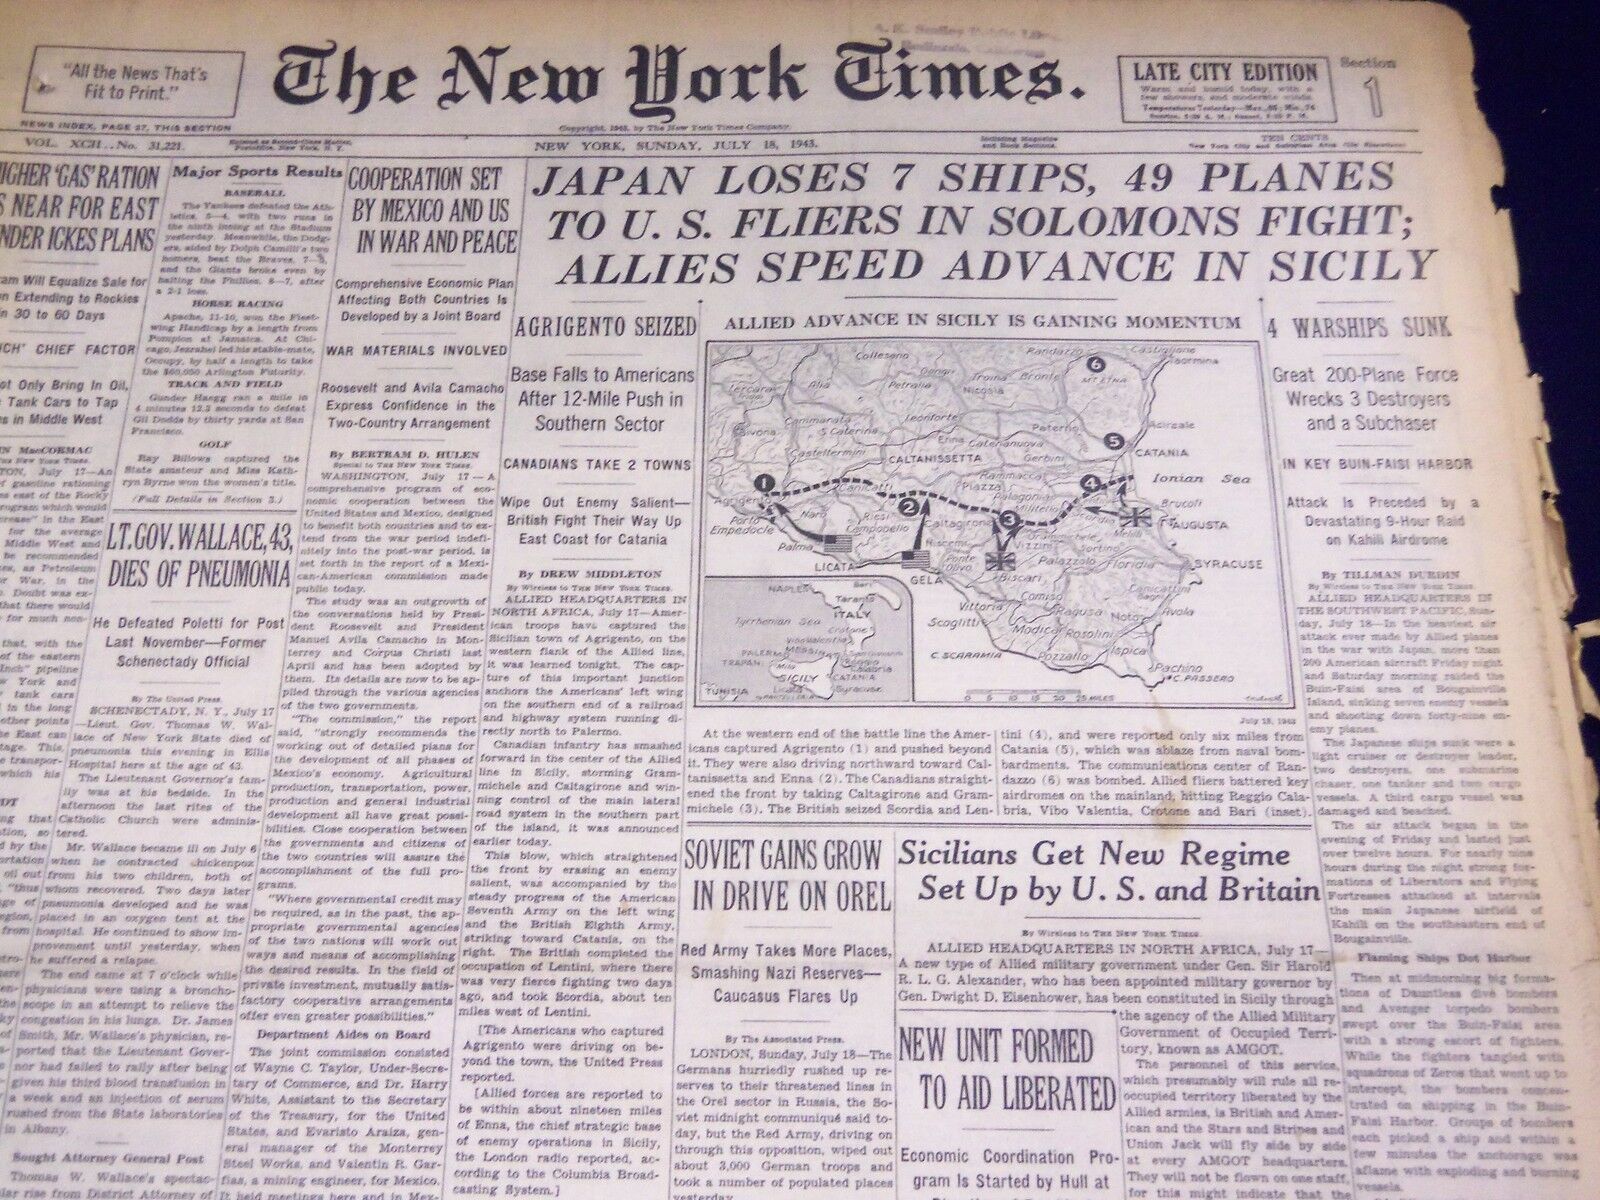 1943 JULY 18 NEW YORK TIMES - JAPAN LOSES 7 SHIPS 49 PLANES - NT 1770